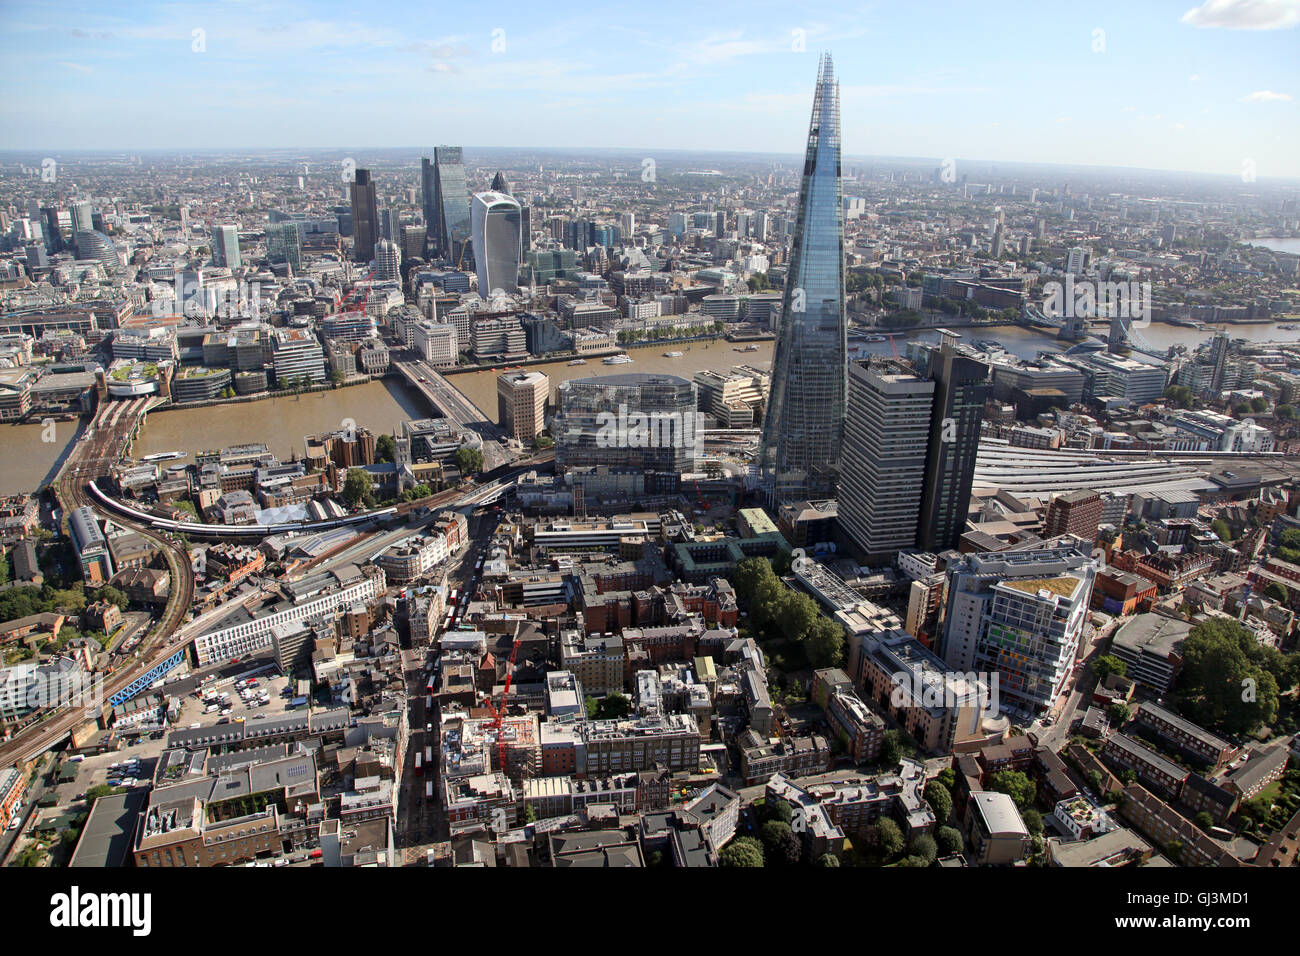 aerial view of The Shard, Guys Hospital, River Thames & the City, London Stock Photo